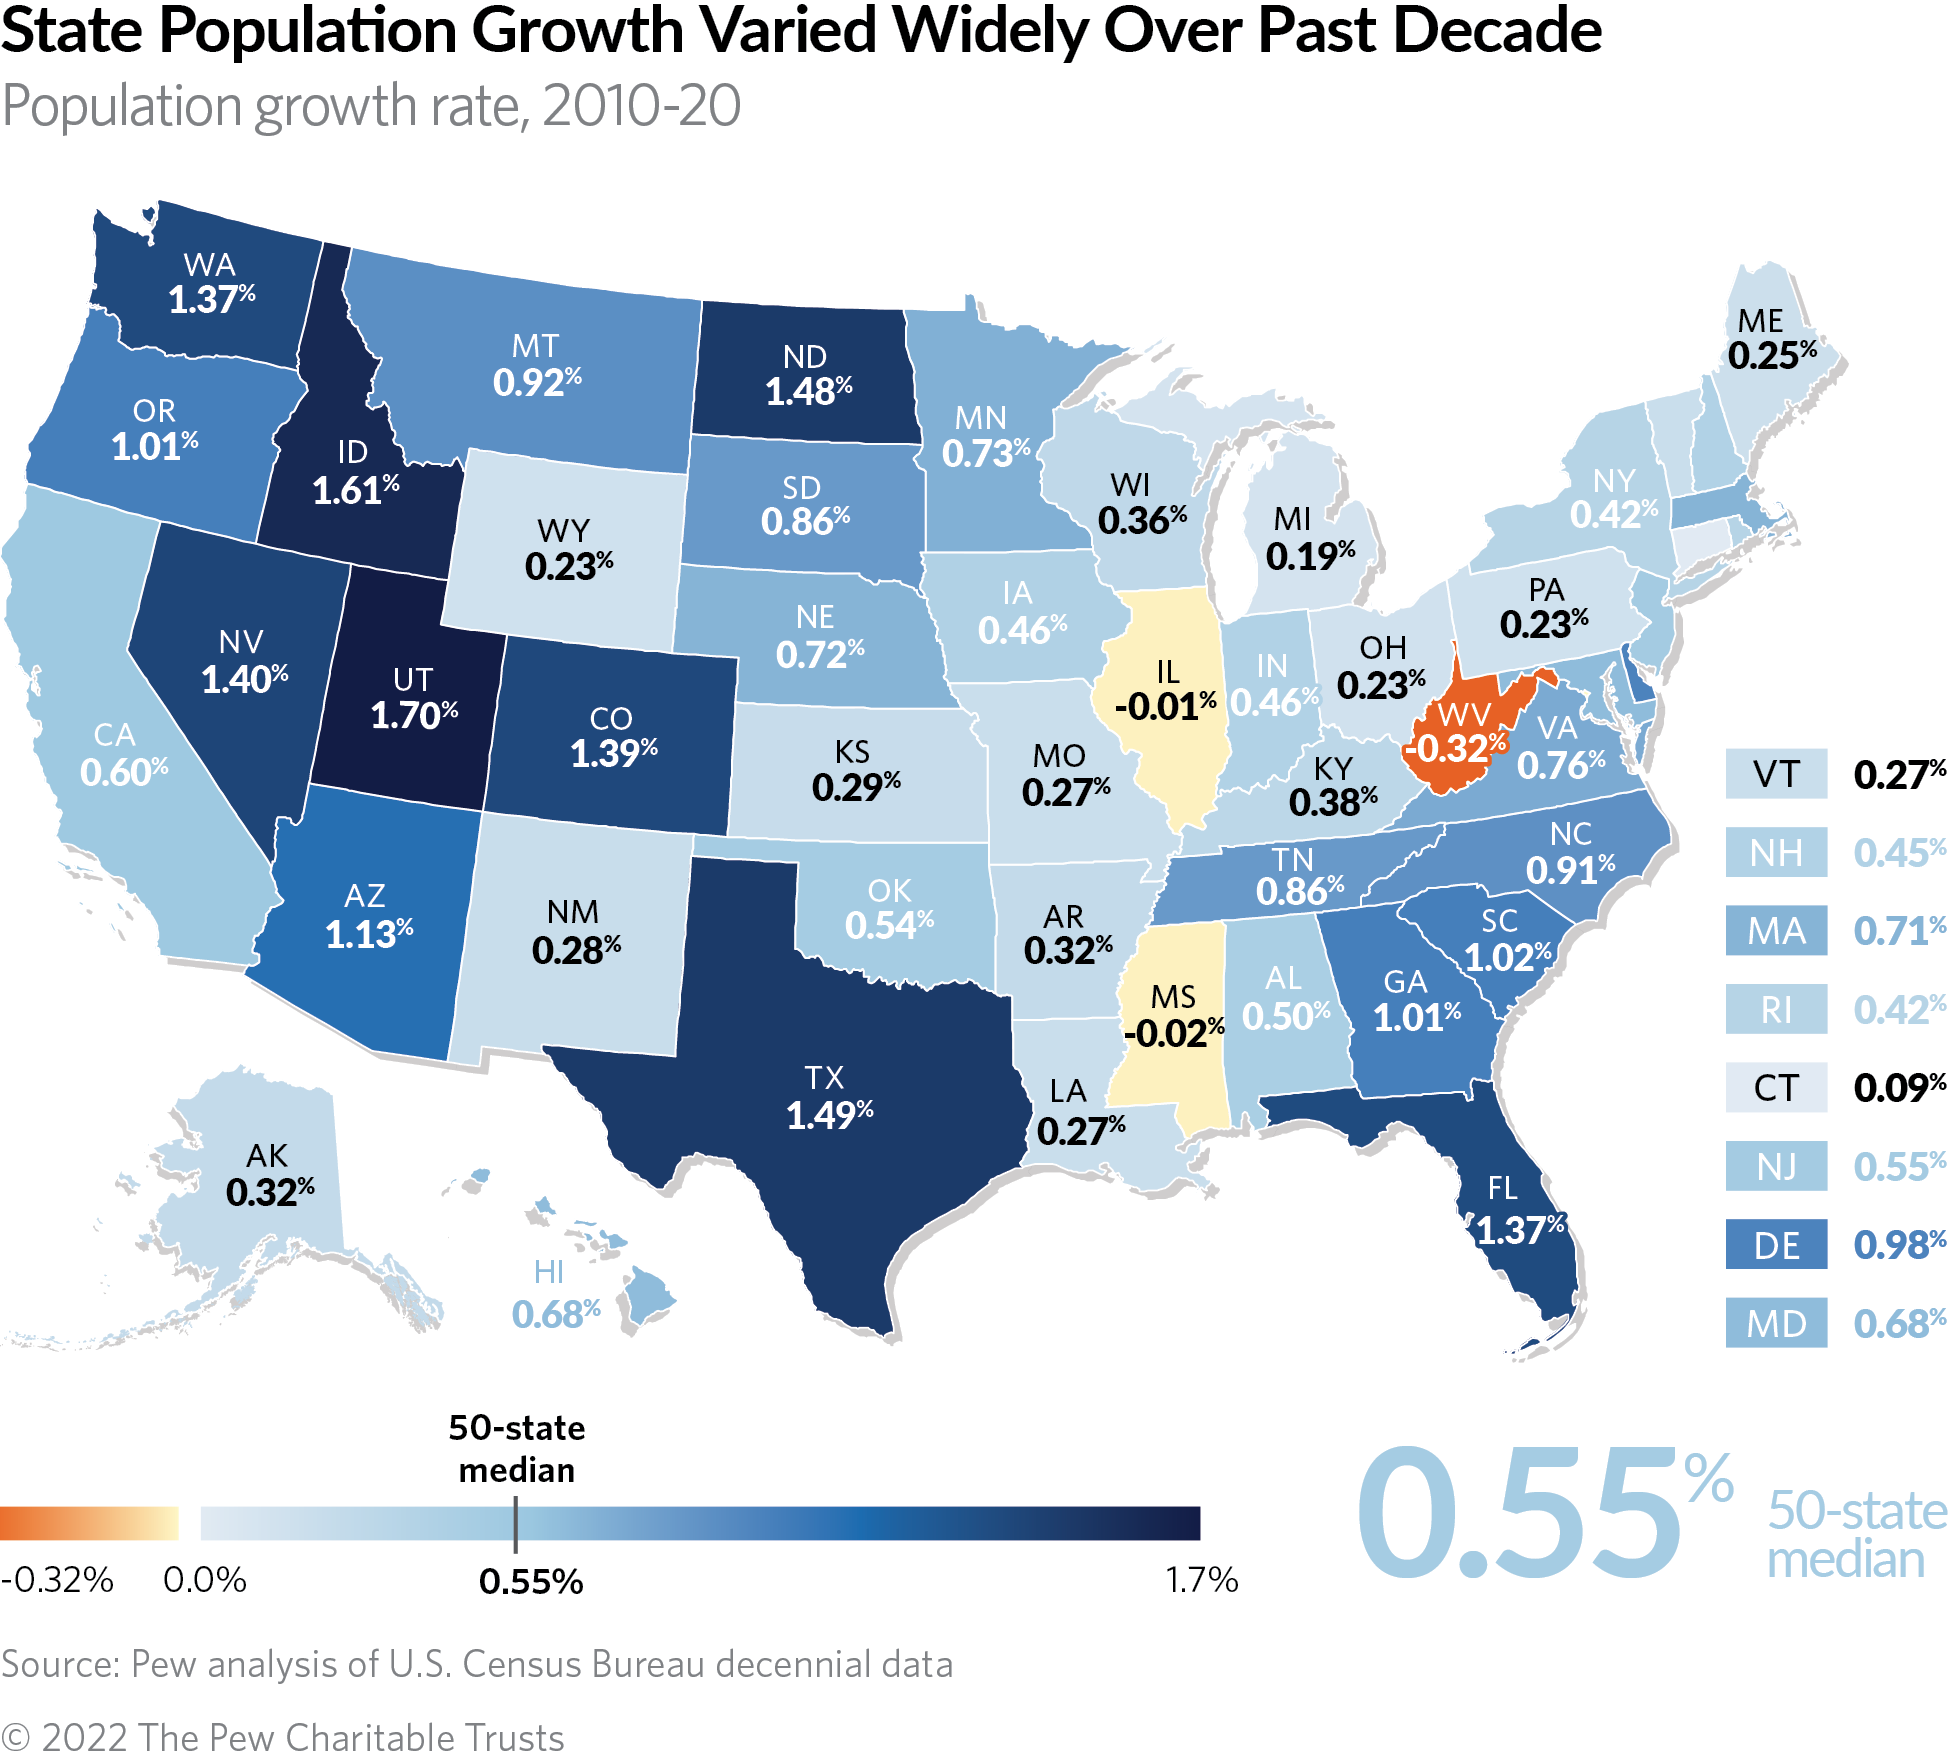 State Population Growth Varied Widely Over Past Decade